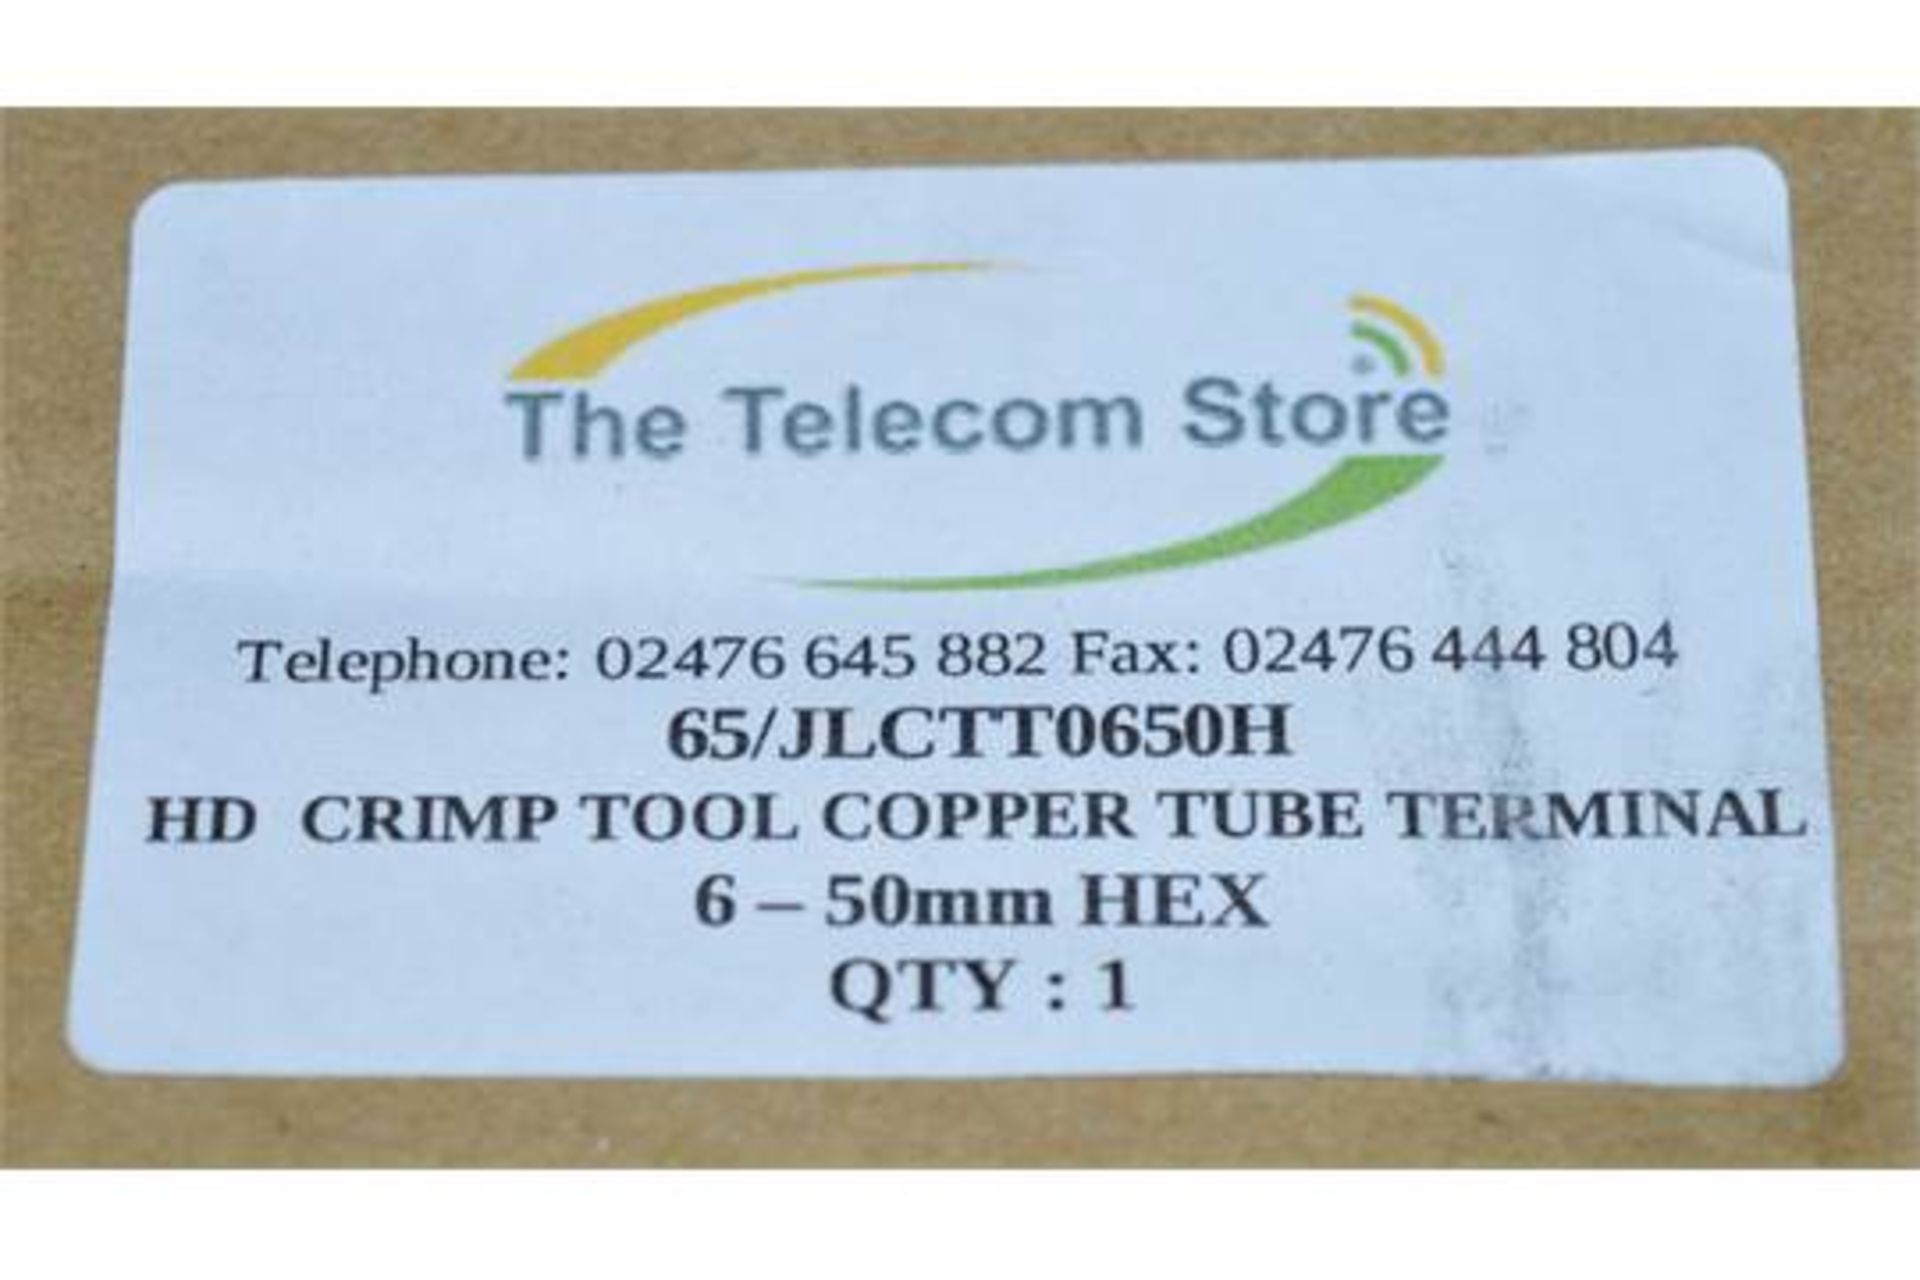 1 x HD Copper Tube Terminal Crimp Tool With Adjustable Hex - 38cm Length - XXX Branded - New and - Image 3 of 10